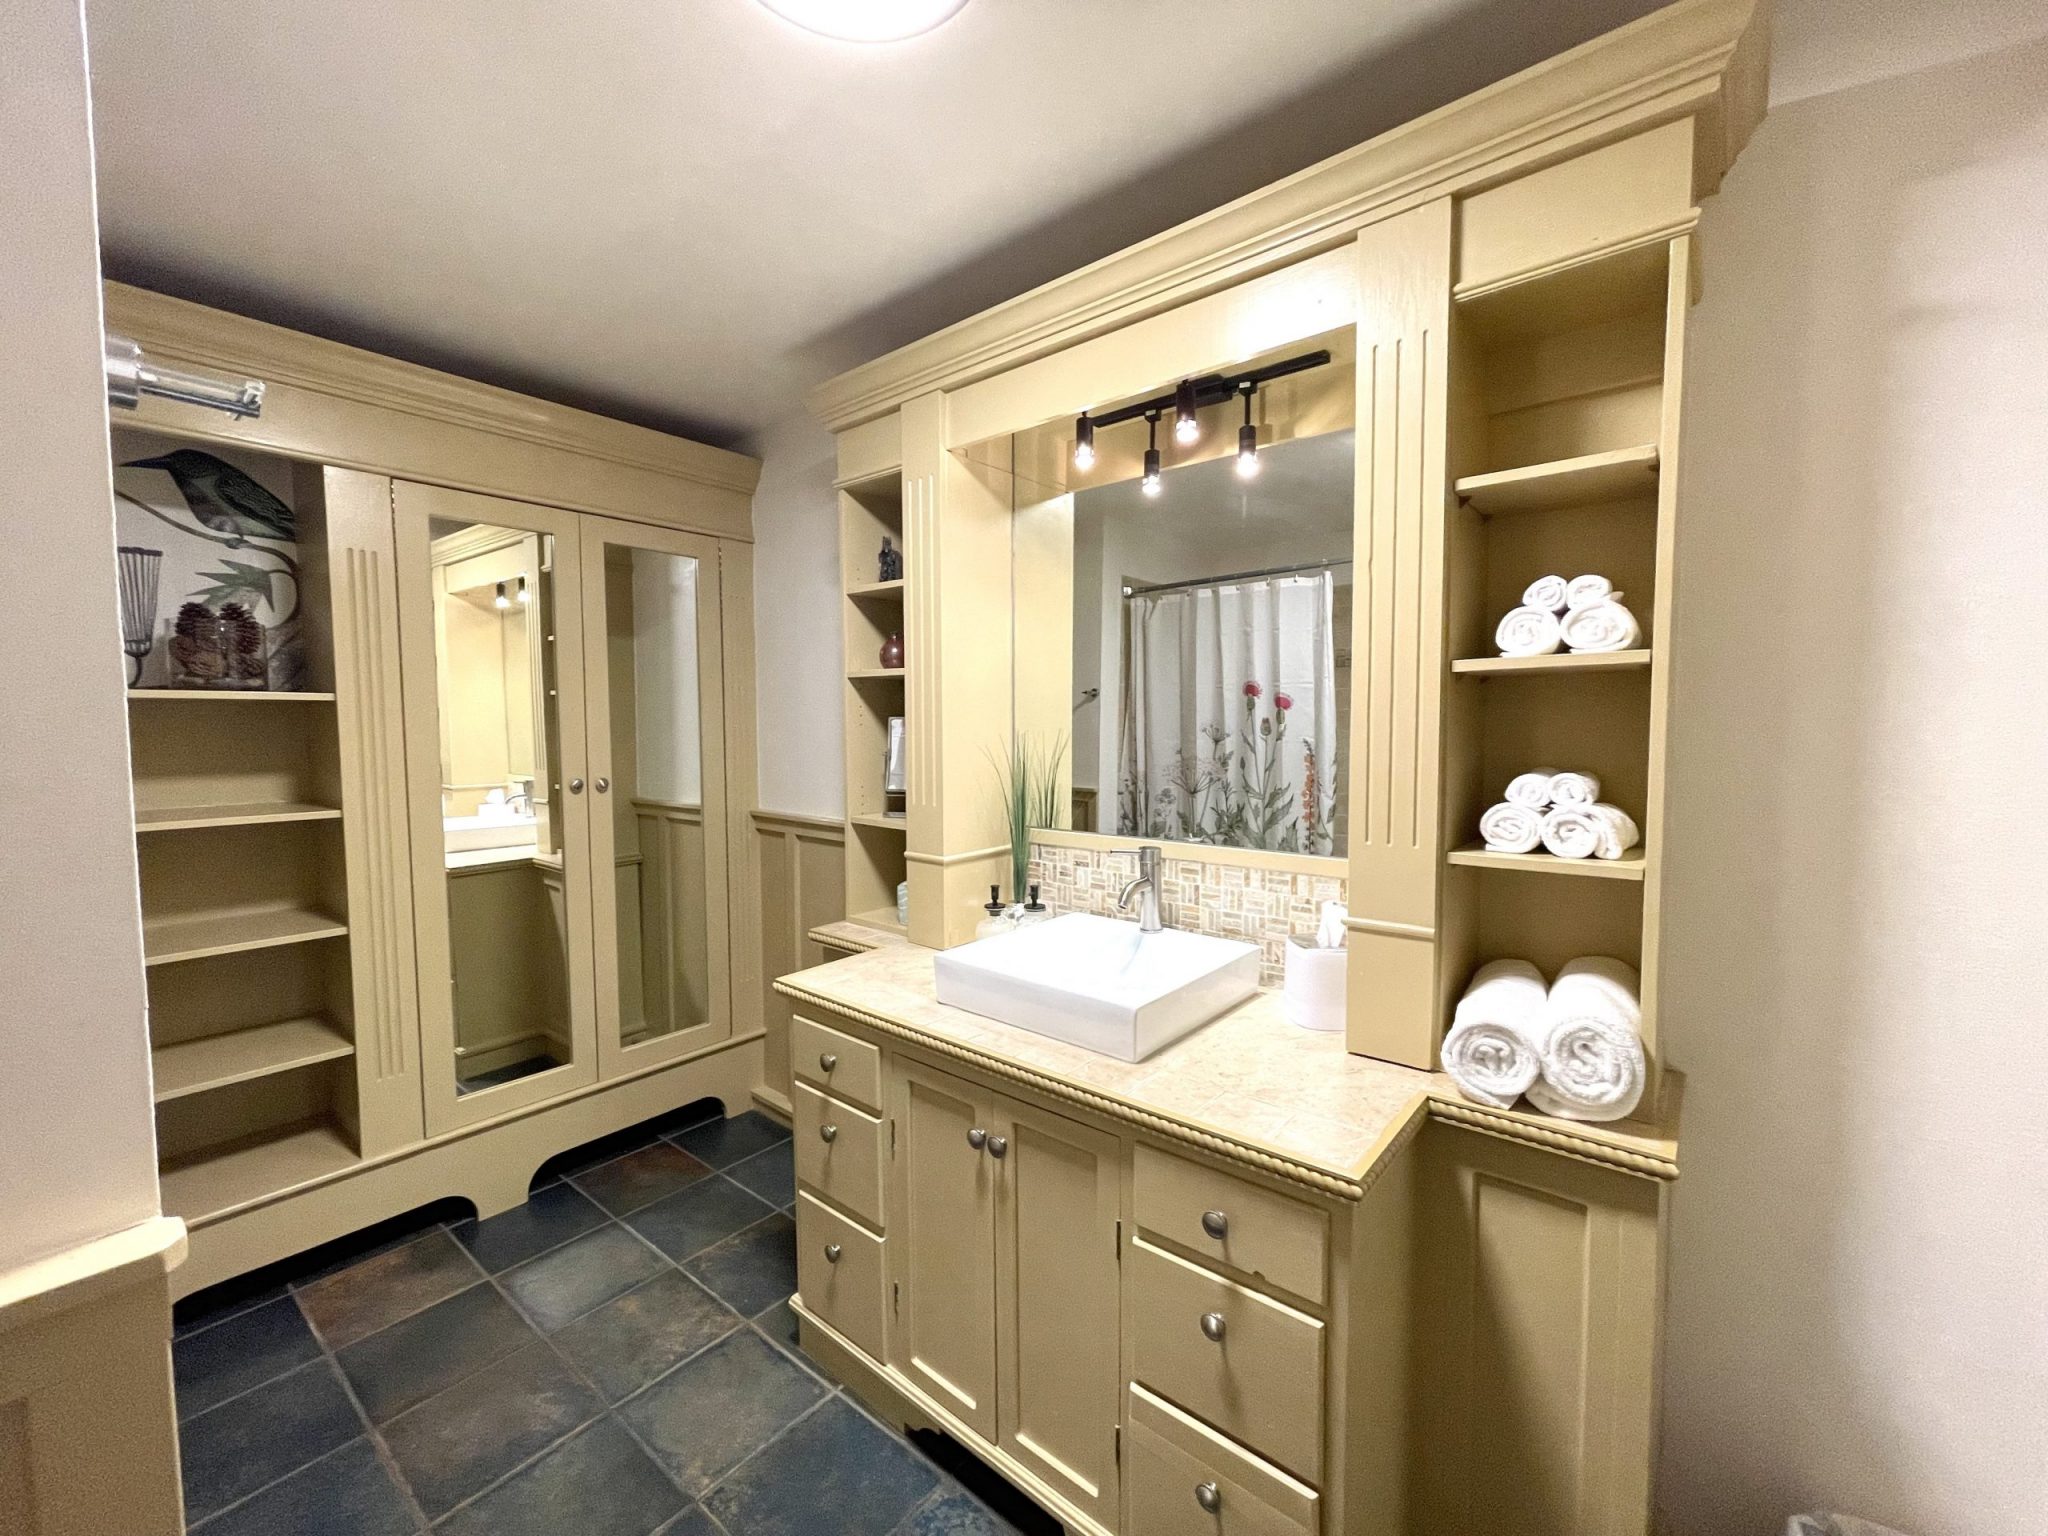 bathroom with built-in cabinetry and wardrobe